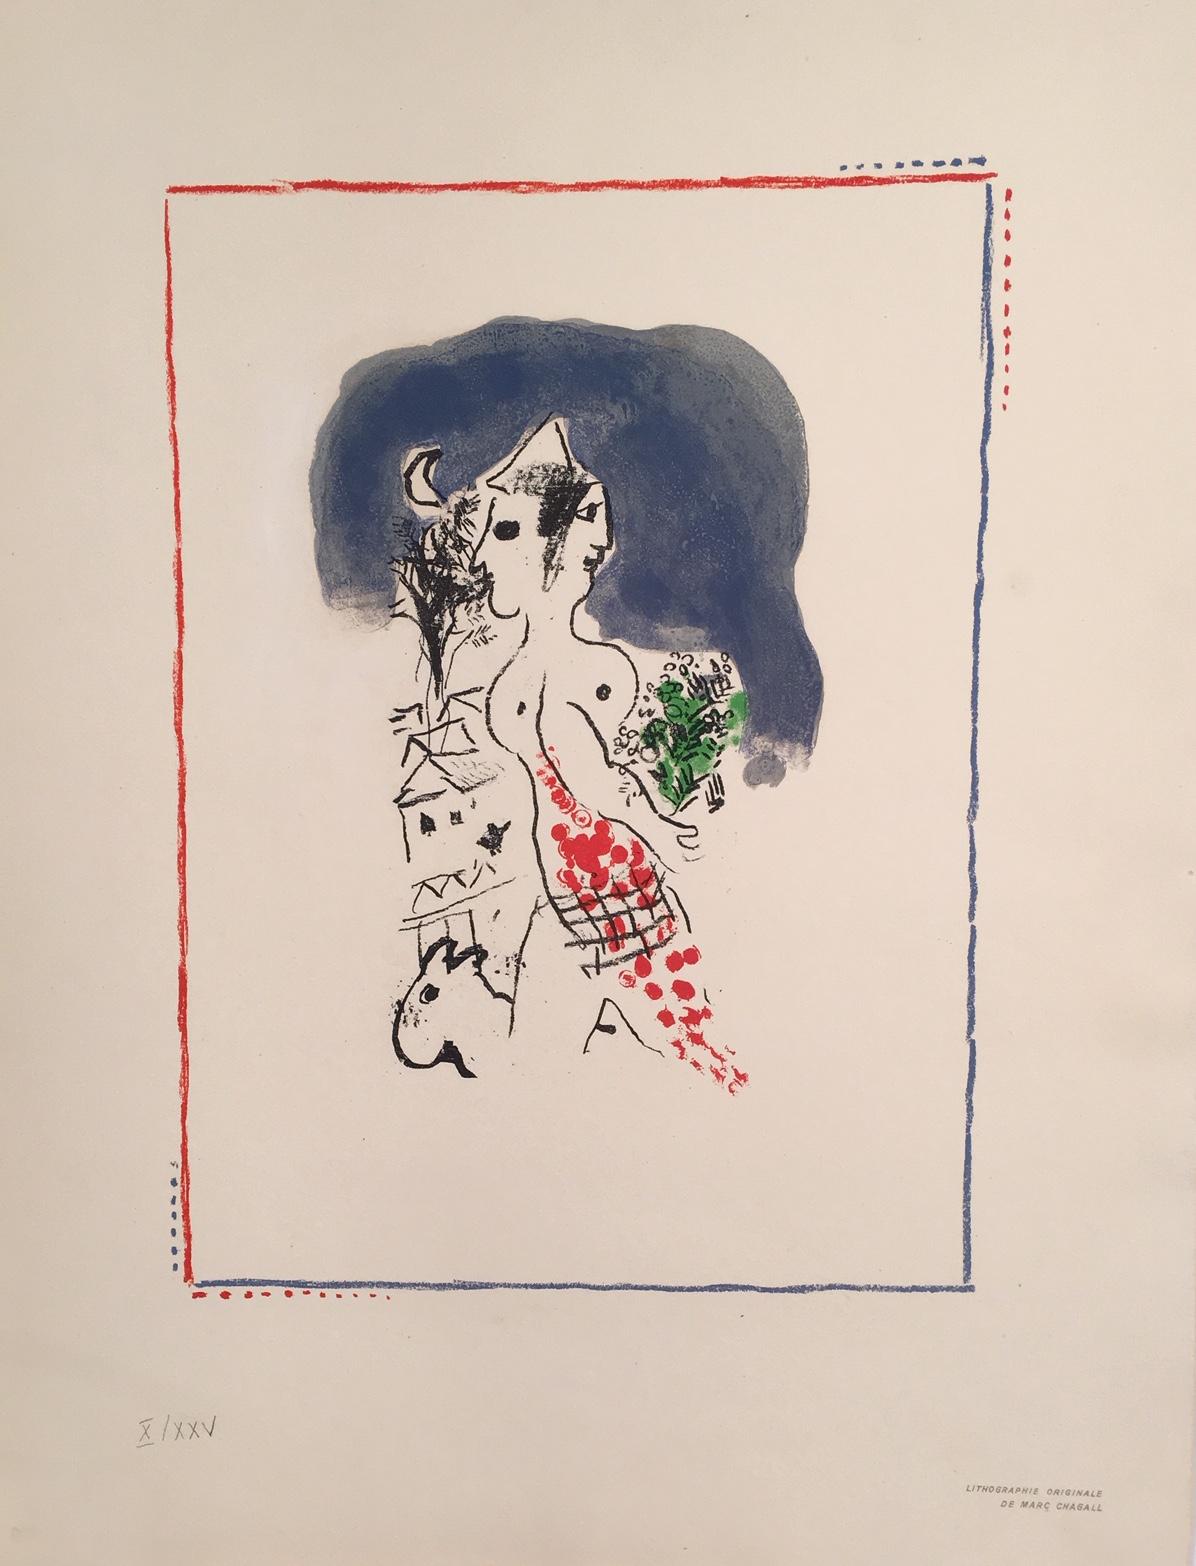 Marc Chagall Figurative Print - Chagall's Lithograph from the Flight Deluxe Portfolio